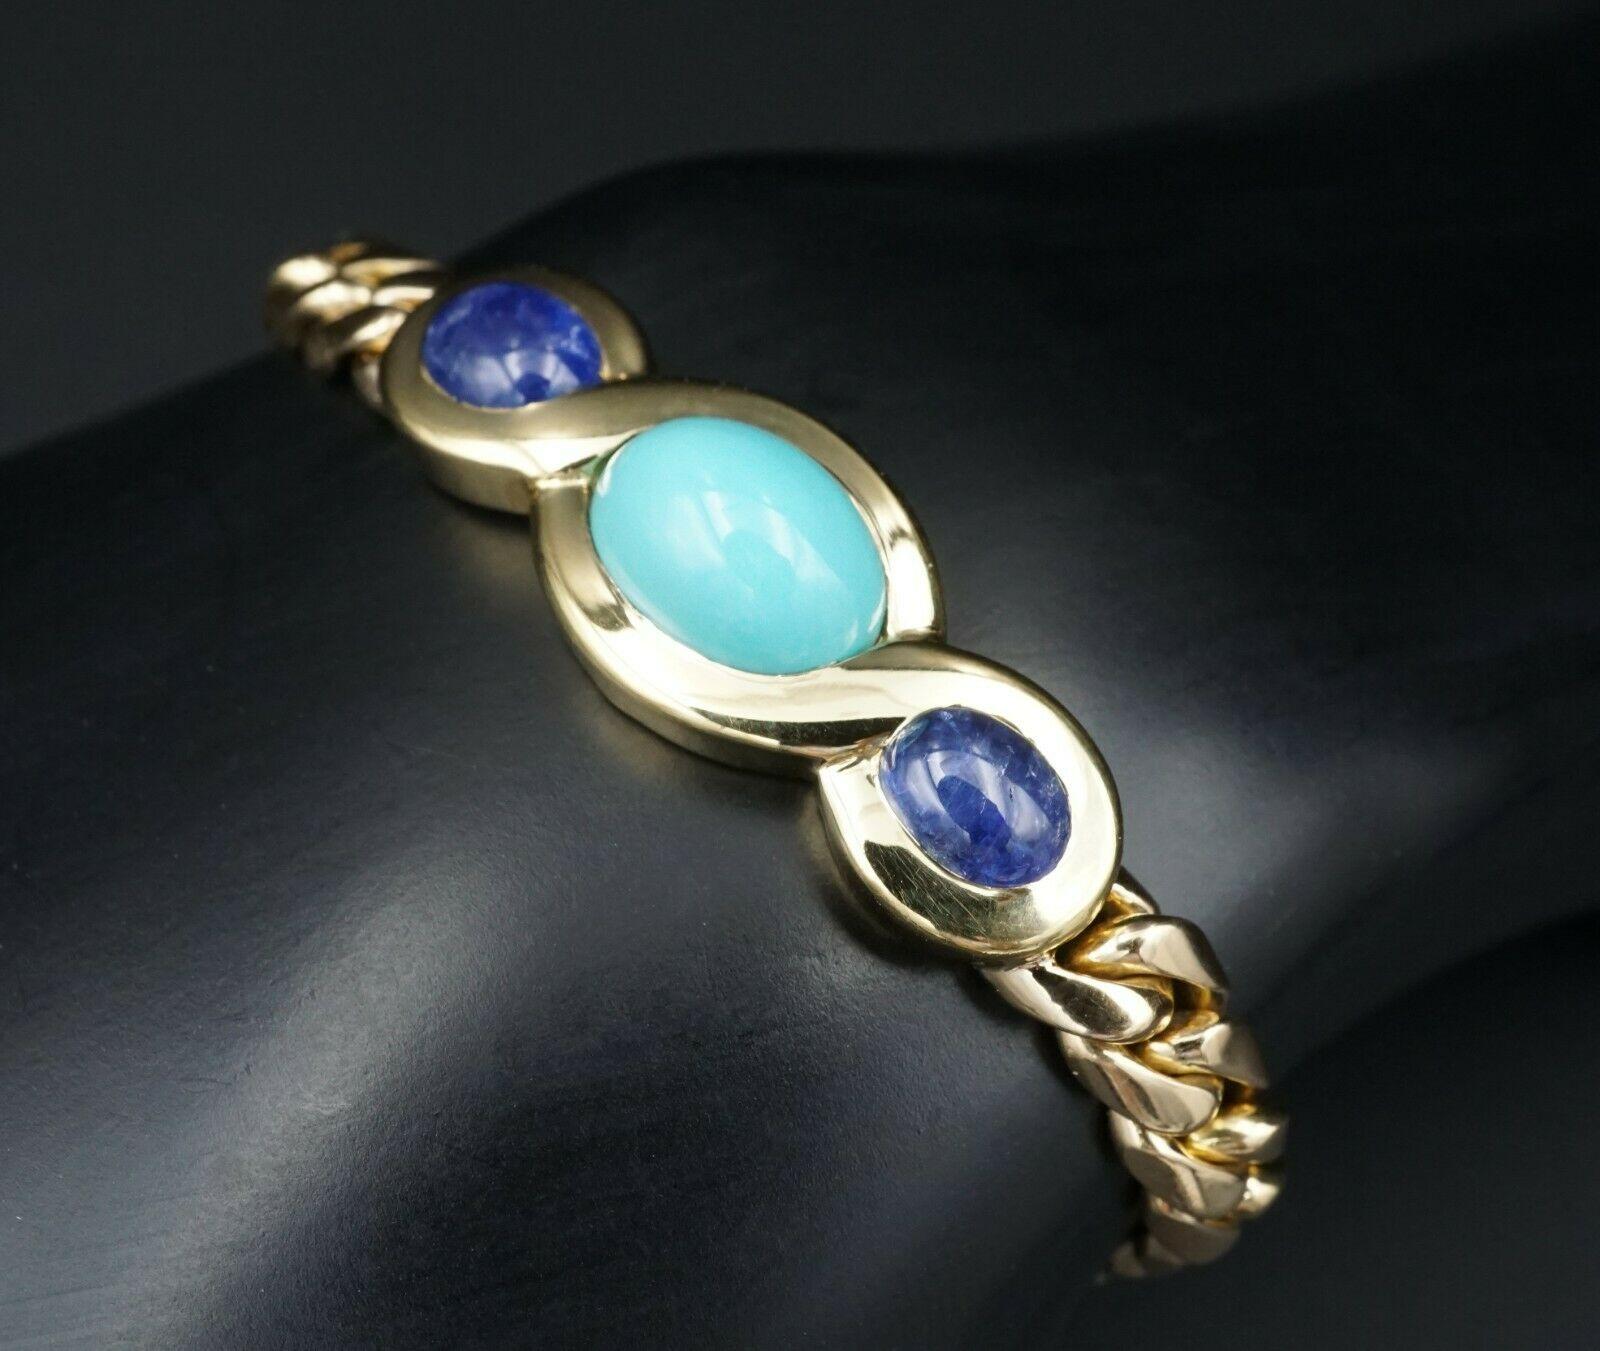 Bvlgari Italy 18k Yellow Gold, Sapphire & Turquoise Link Bracelet Vintage & Rare


Here is your chance to purchase a beautiful and highly collectible designer bracelet.  Truly a great piece at a great price! 

Weight: 38.2 grams

Condition: